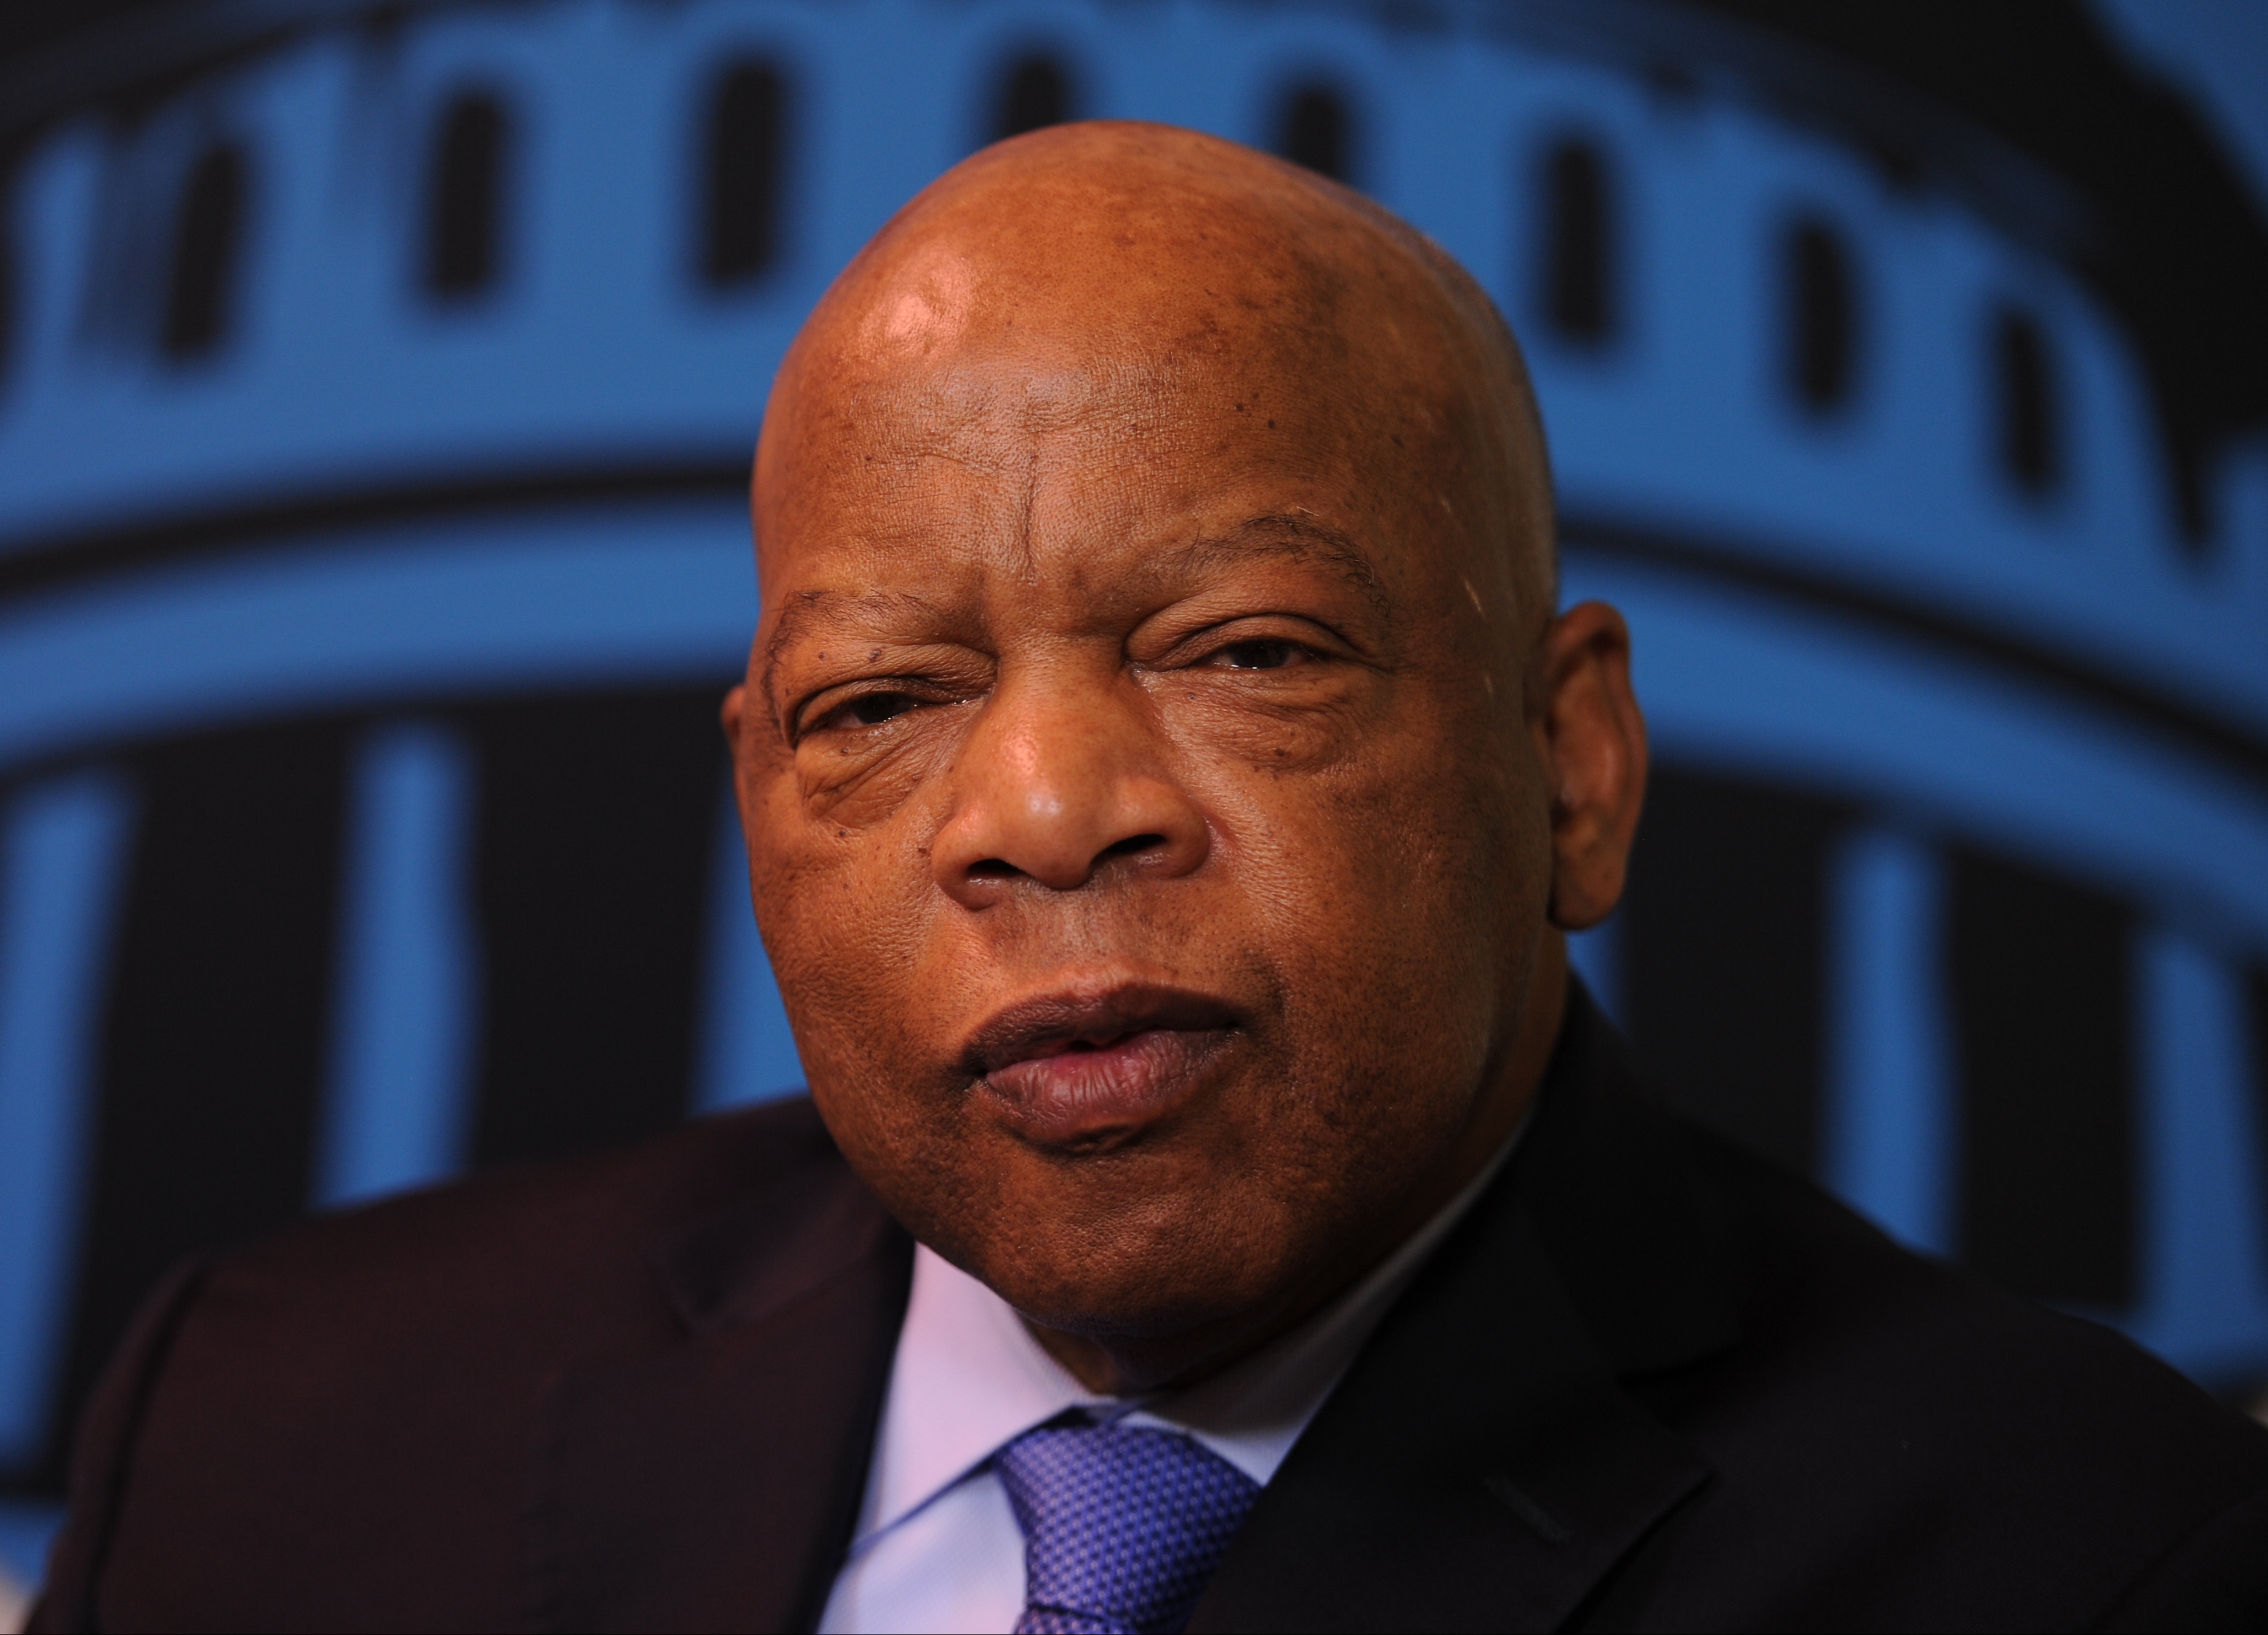 50 years after Selma, John Lewis on unfinished business